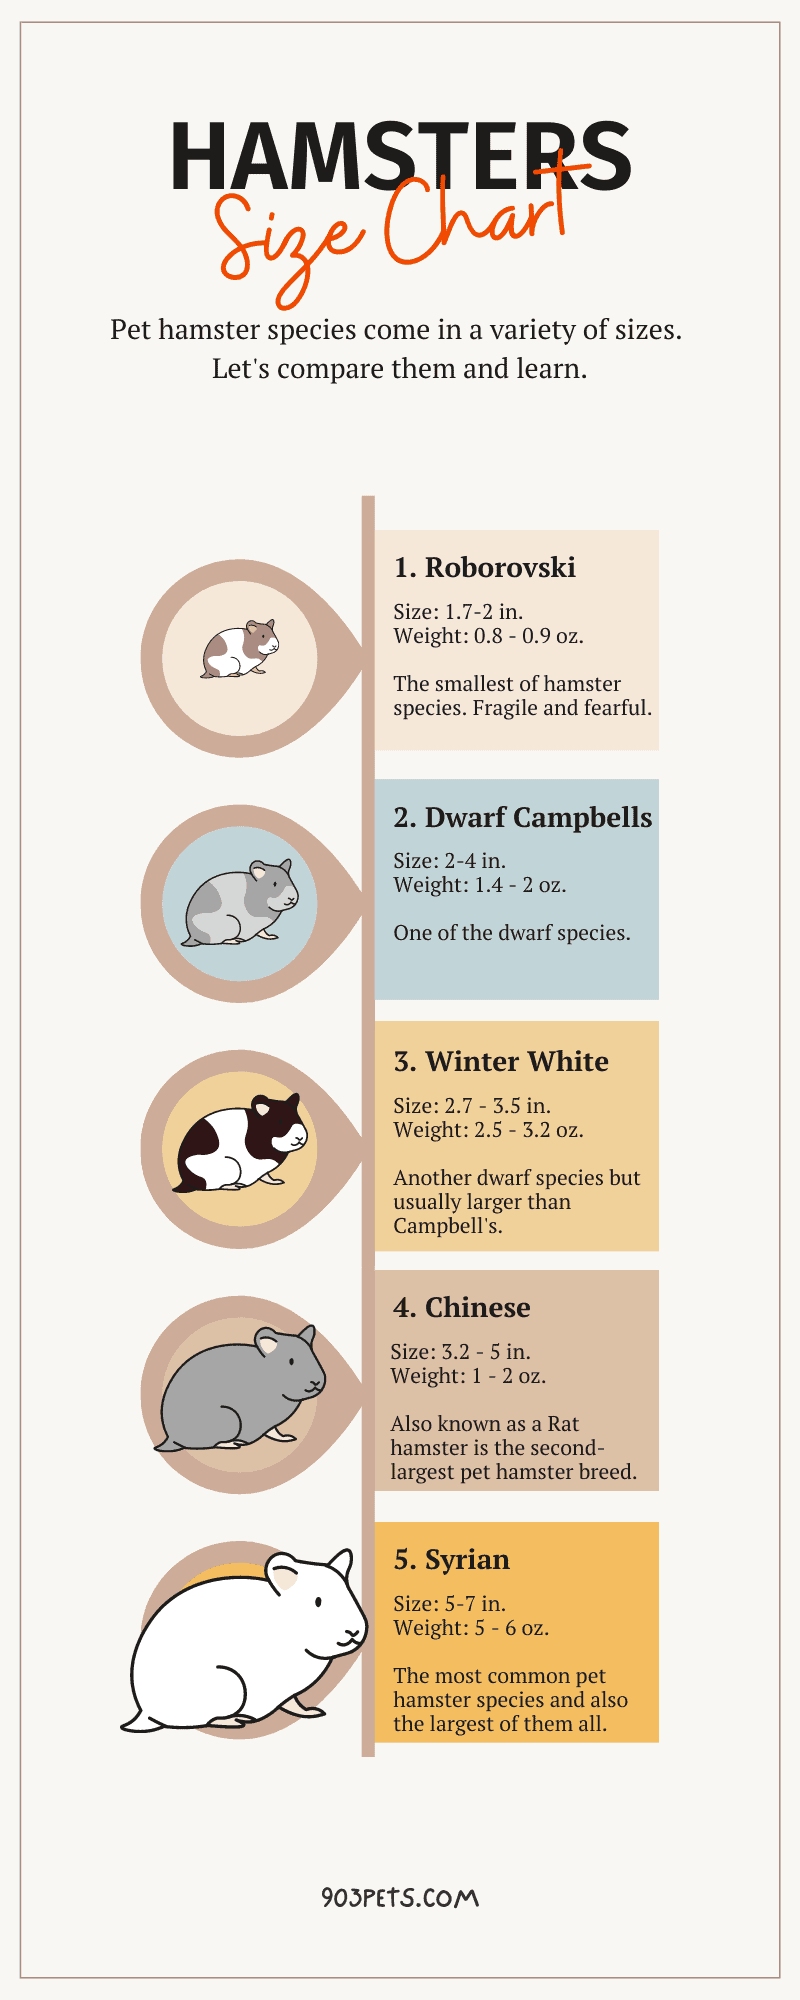 Hamster size chart infographic for pet hamster species.